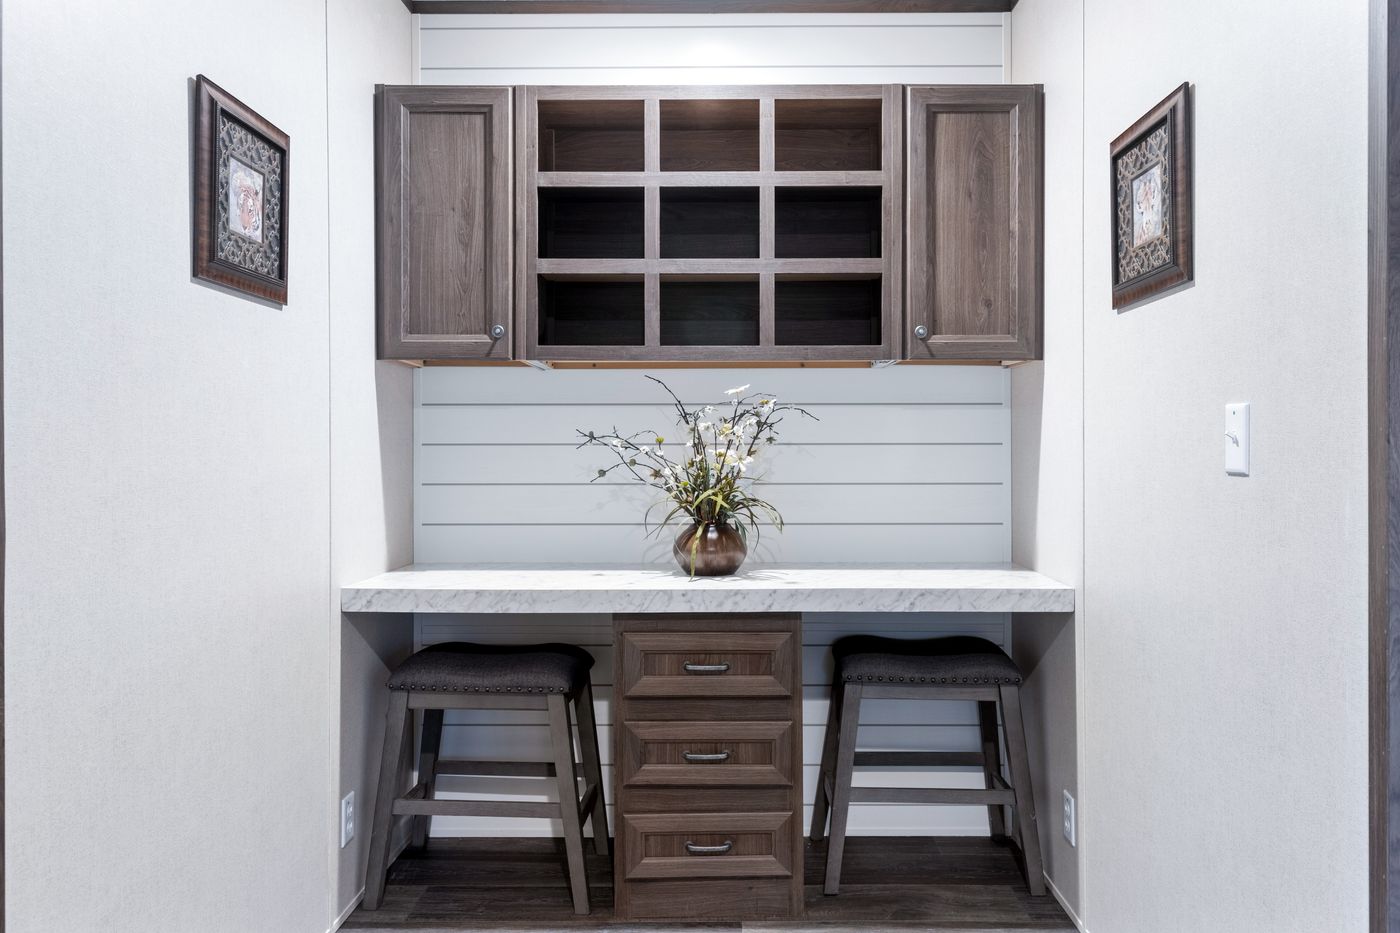 The HERCULES Study Nook. This Manufactured Mobile Home features 4 bedrooms and 2 baths.